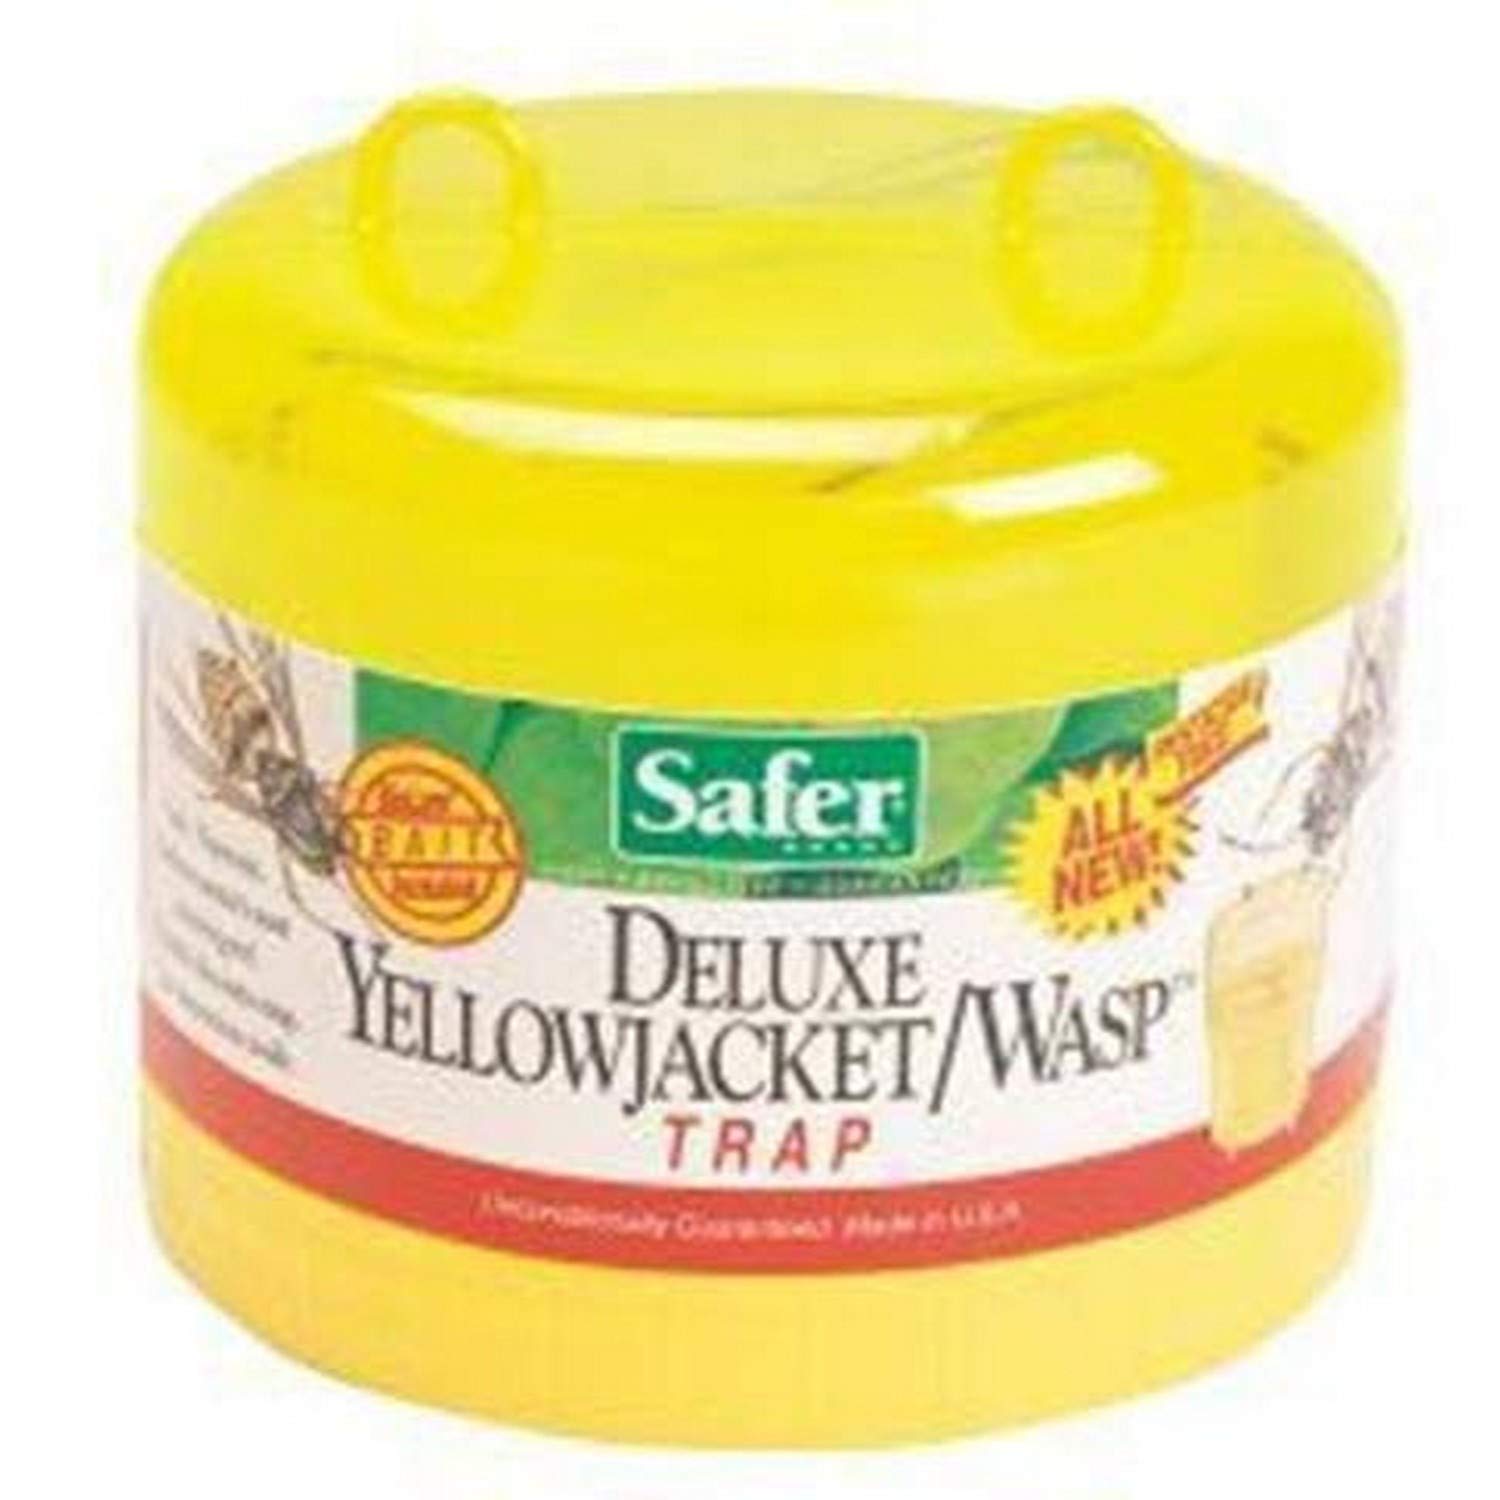 Safer Brand 00280 Deluxe Jacket Wasp Trap with Bait